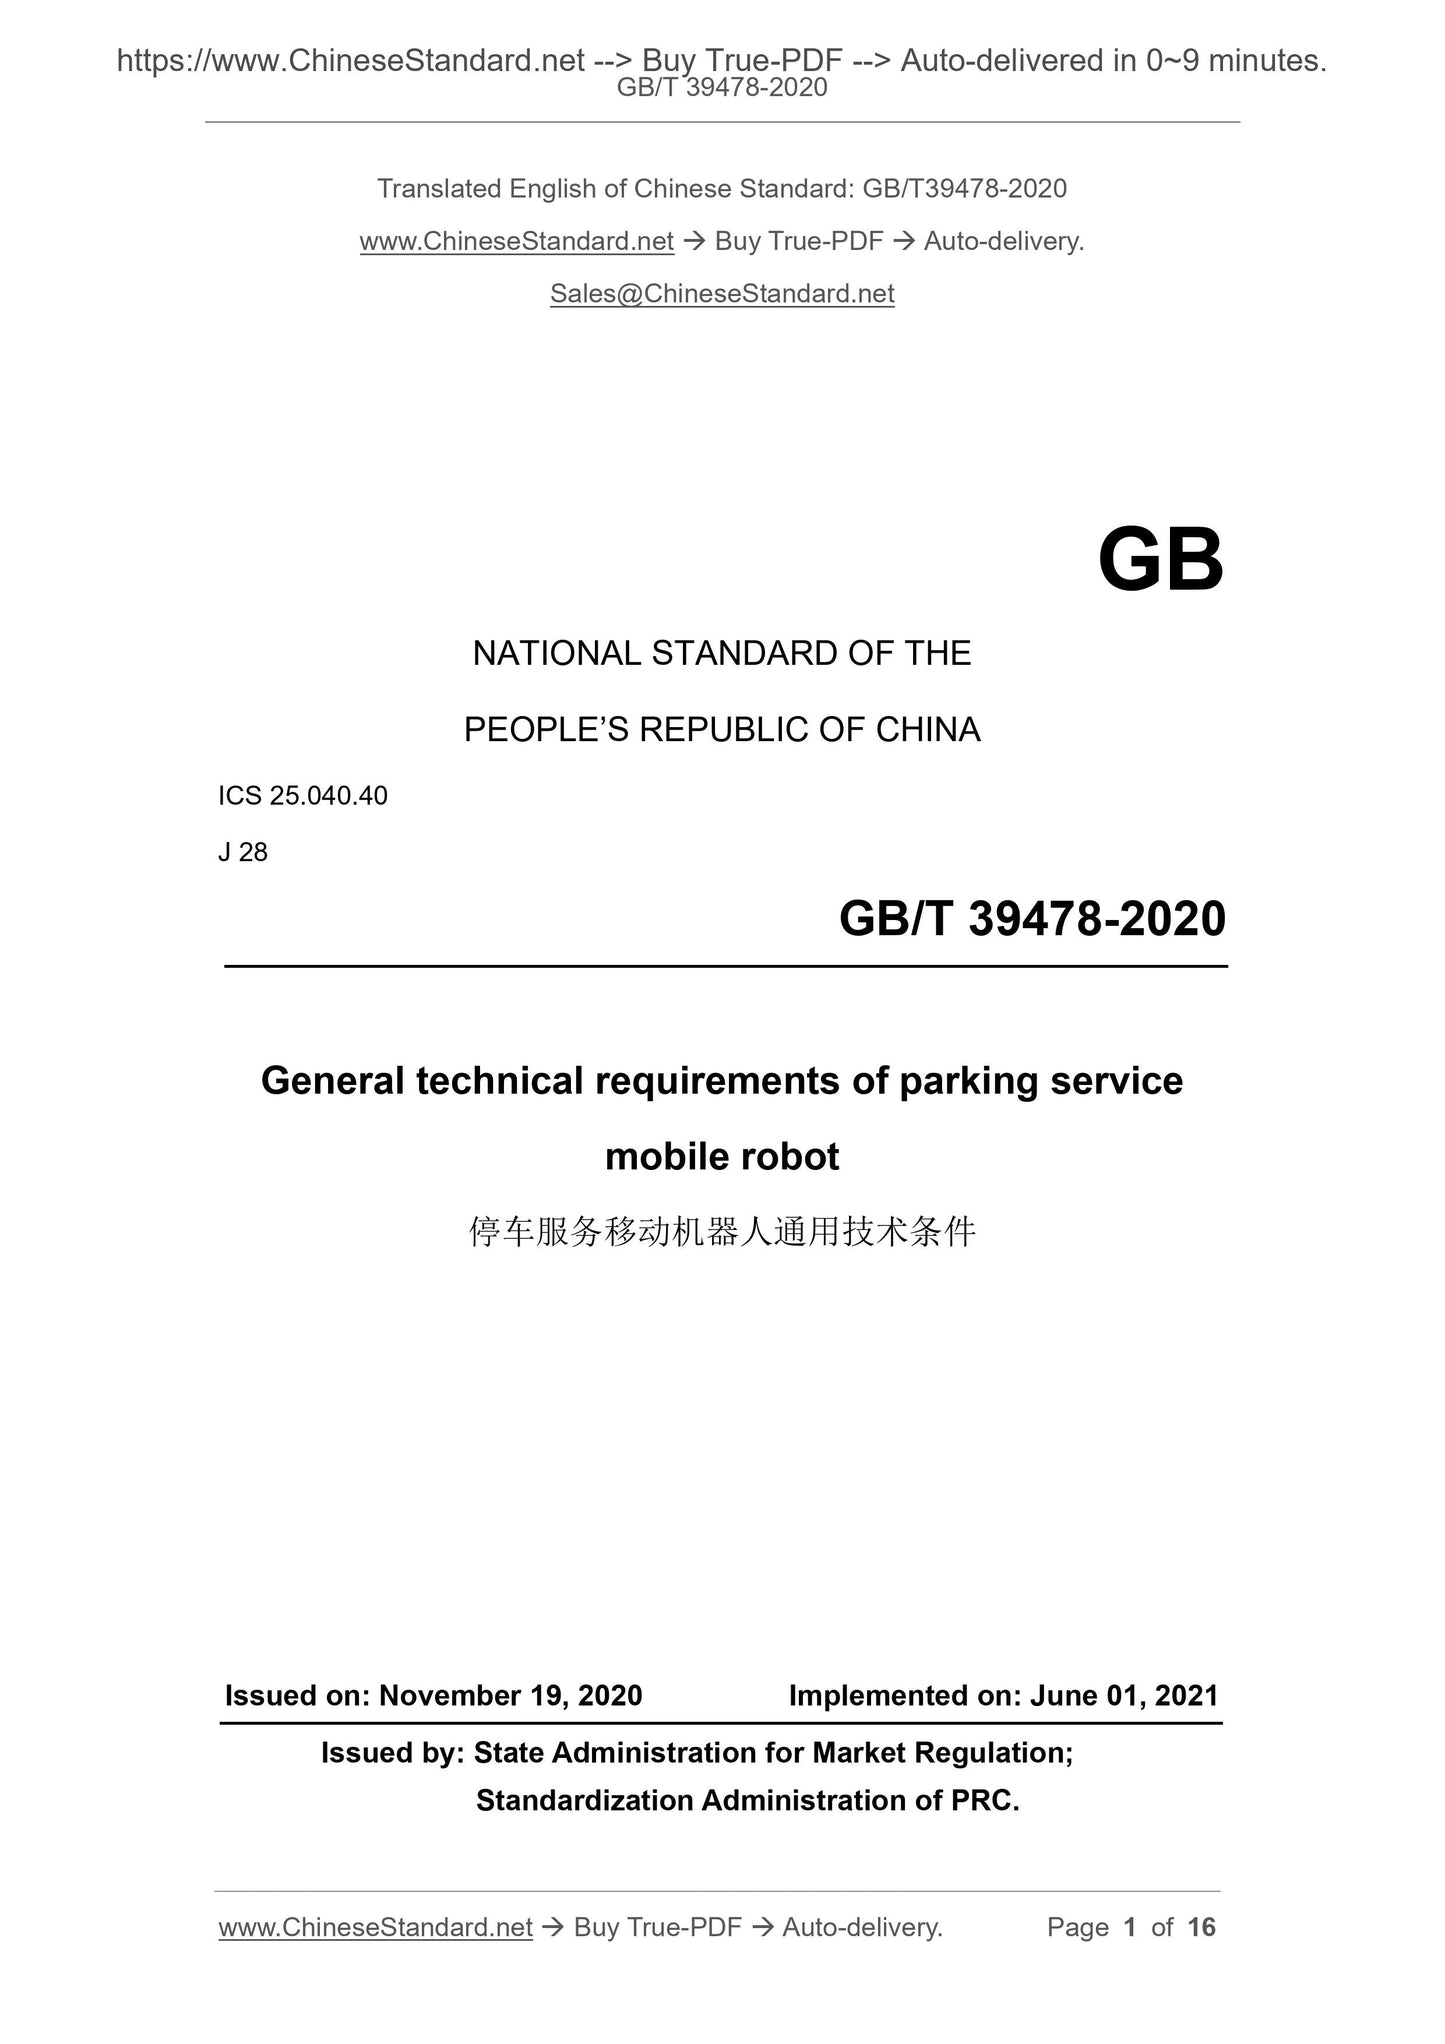 GB/T 39478-2020 Page 1